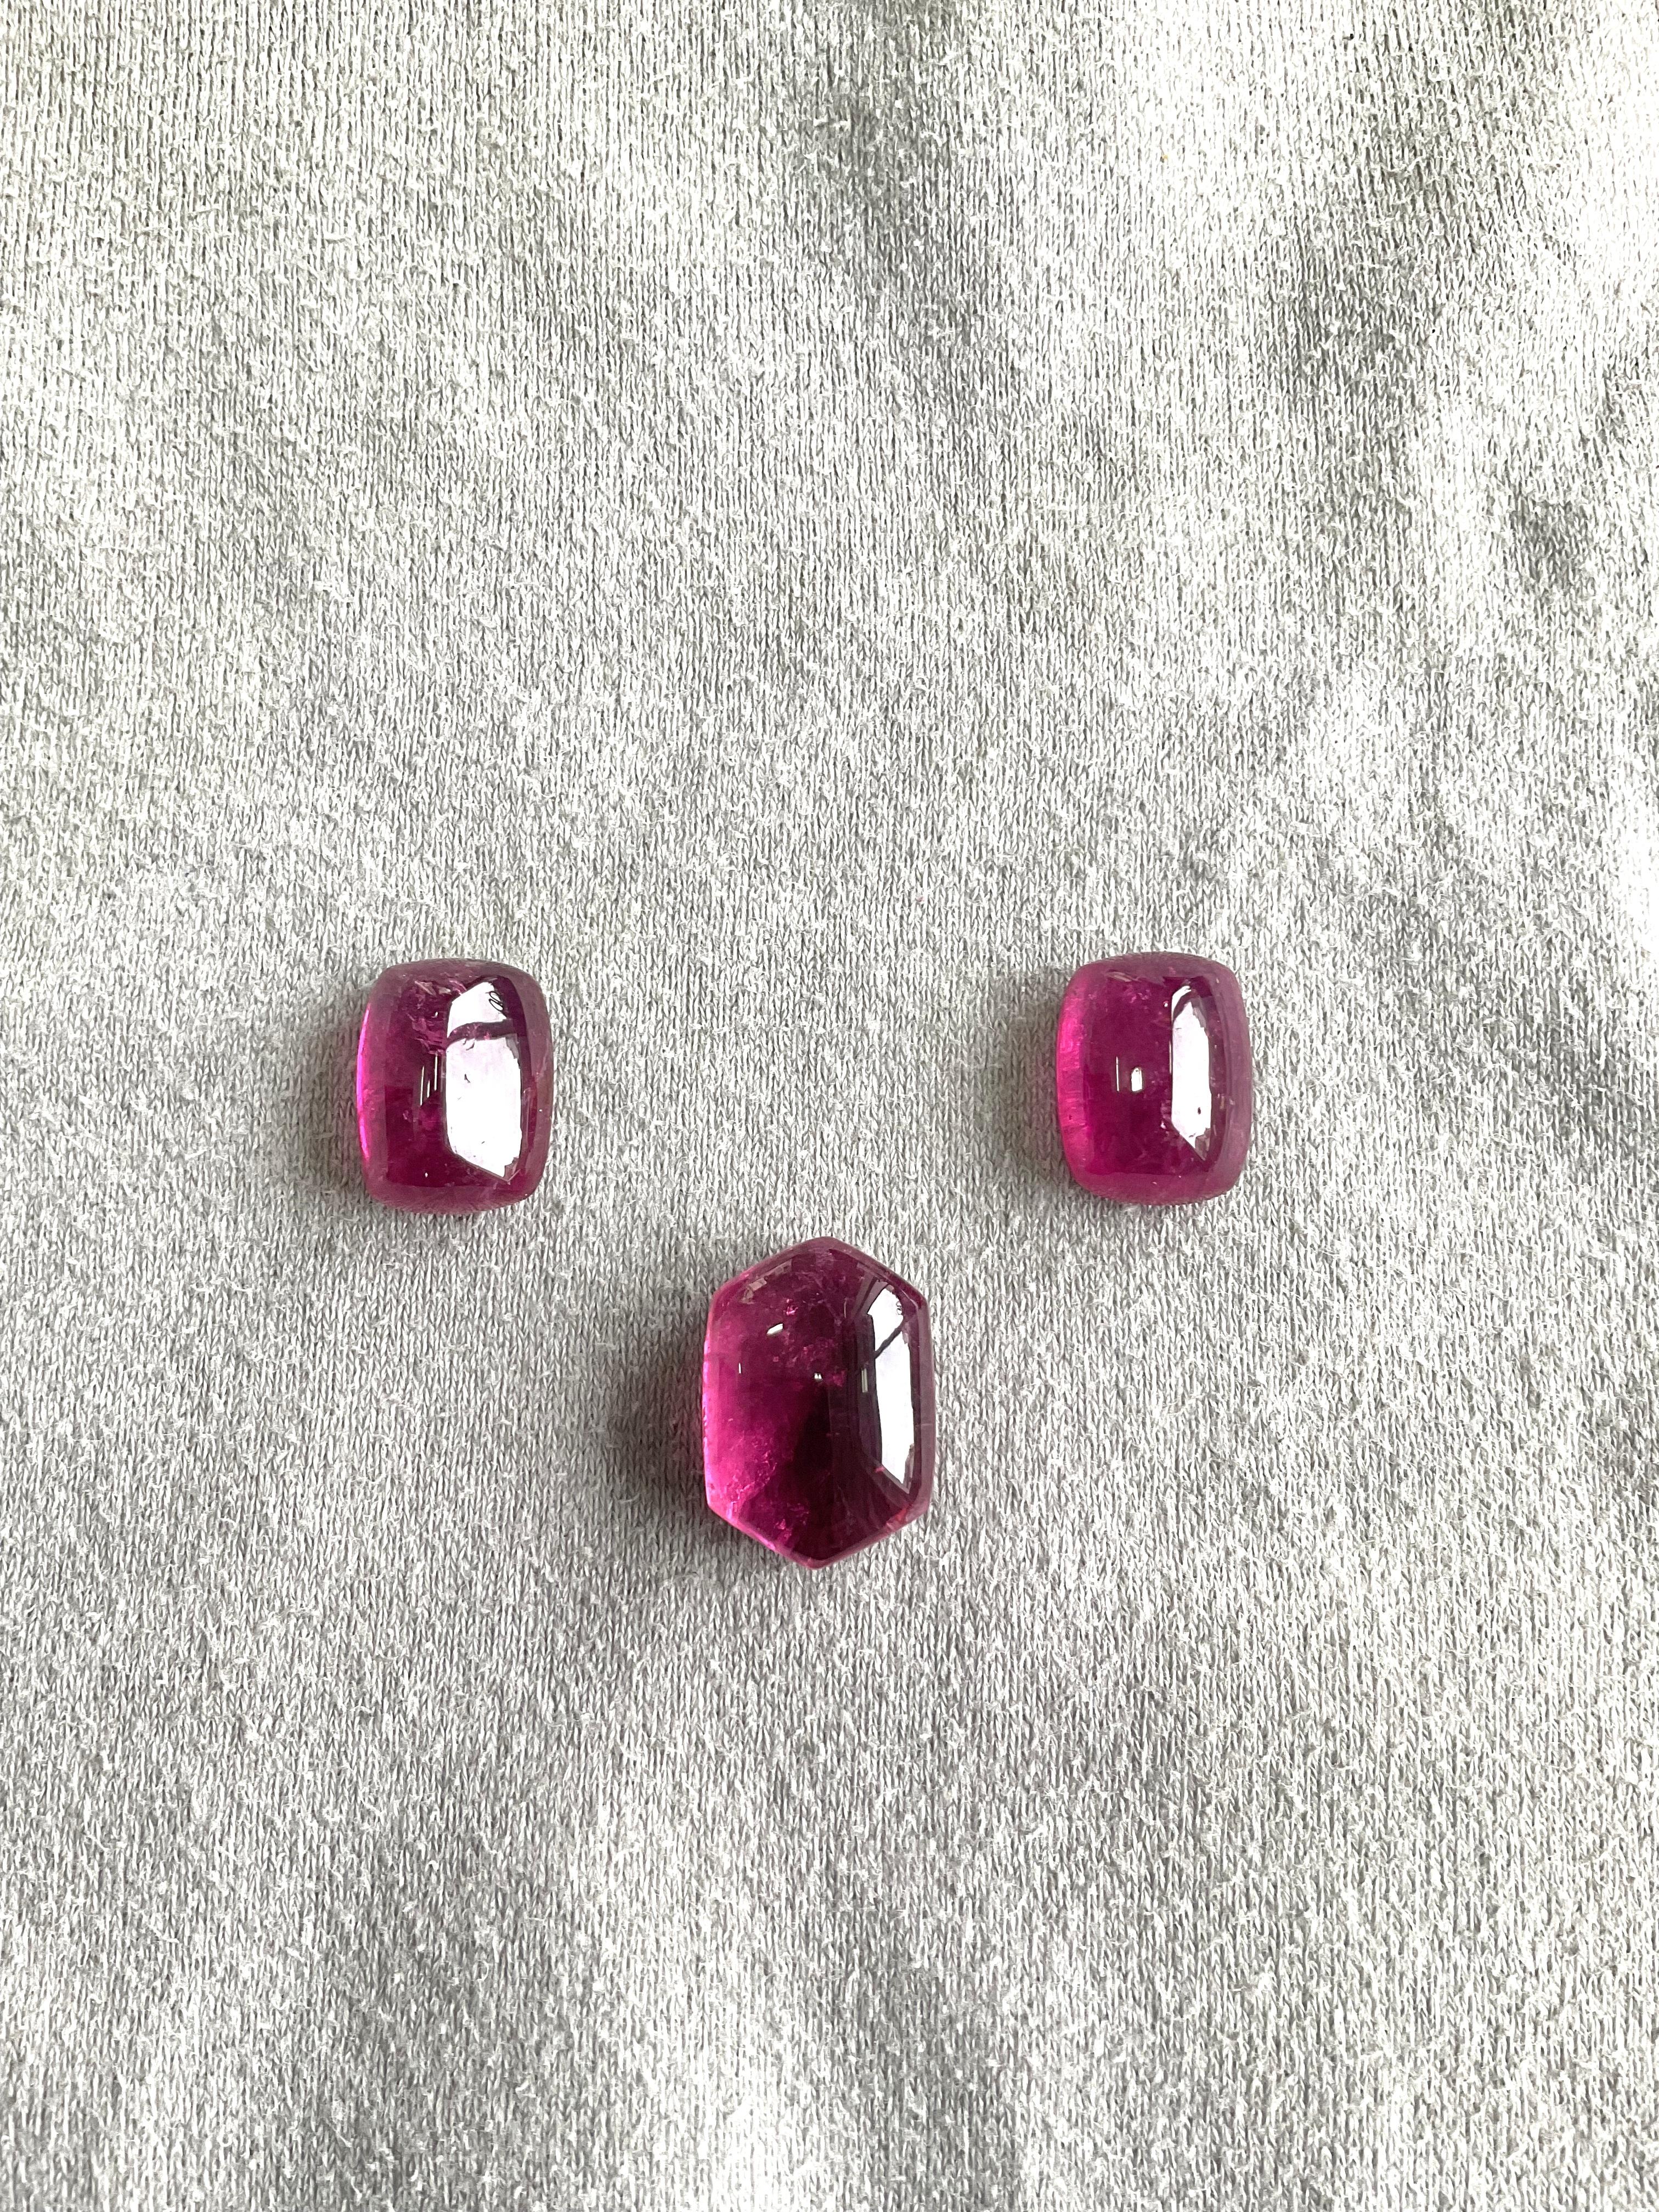 Sugarloaf Cabochon 44.85 Carats Rubellite Tourmaline 3 Pieces Top Fine Jewelry Set Natural Gemstone For Sale